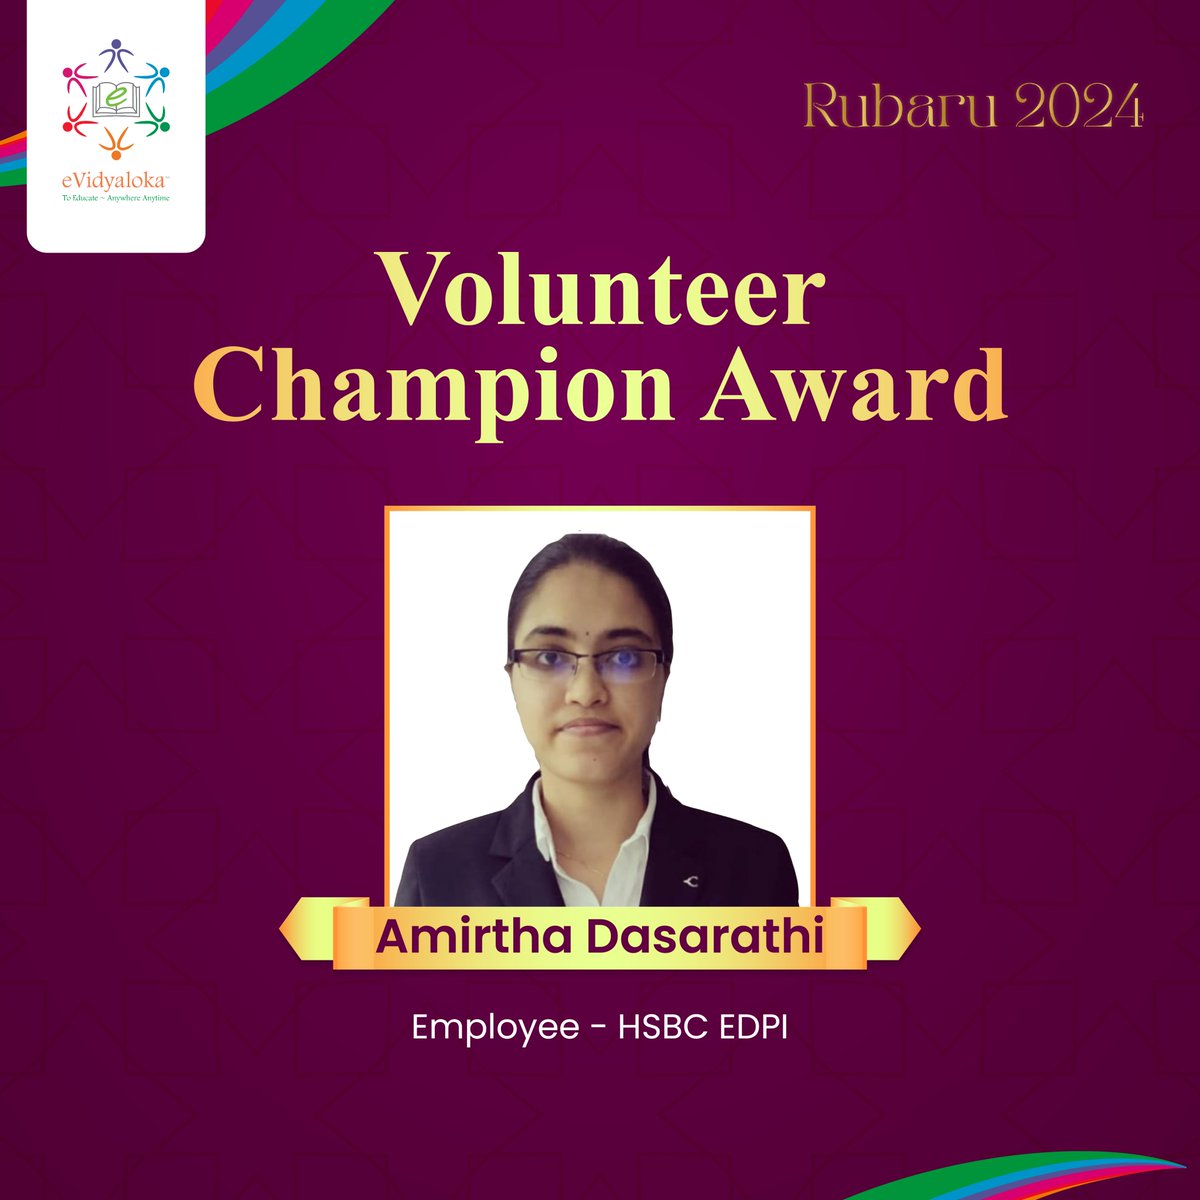 At RUBARU 2024, eVidyaloka celebrated its devoted volunteers for their tireless work in uplifting rural students throughout the past academic year.

Our heartfelt appreciation goes to Amirtha Dasarathi from HSBC EDPI. 
#eVidyaloka #Volunteer #childdevelopment